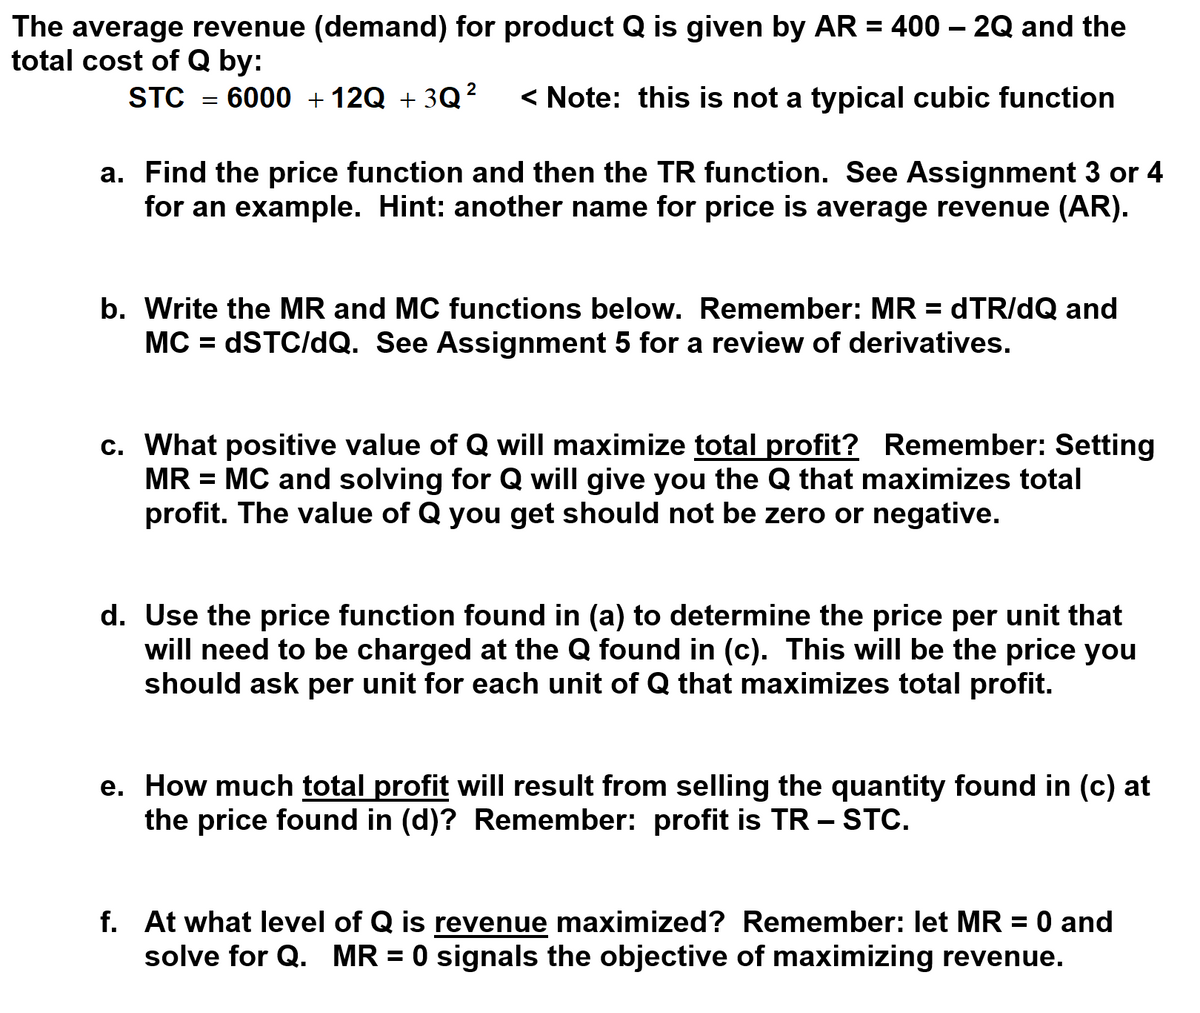 The average revenue (demand) for product Q is given by AR = 400 – 2Q and the
total cost of Q by:
STC
6000 + 12Q + 3Q?
< Note: this is not a typical cubic function
a. Find the price function and then the TR function. See Assignment 3 or 4
for an example. Hint: another name for price is average revenue (AR).
b. Write the MR and MC functions below. Remember: MR = dTR/dQ and
MC = DSTC/dQ. See Assignment 5 for a review of derivatives.
c. What positive value of Q will maximize total profit? Remember: Setting
MR = MC and solving for Q will give you the Q that maximizes total
profit. The value of Q you get should not be zero or negative.
d. Use the price function found in (a) to determine the price per unit that
will need to be charged at the Q found in (c). This will be the price you
should ask per unit for each unit of Q that maximizes total profit.
e. How much total profit will result from selling the quantity found in (c) at
the price found in (d)? Remember: profit is TR – STC.
f. At what level of Q is revenue maximized? Remember: let MR = 0 and
solve for Q. MR = 0 signals the objective of maximizing revenue.
